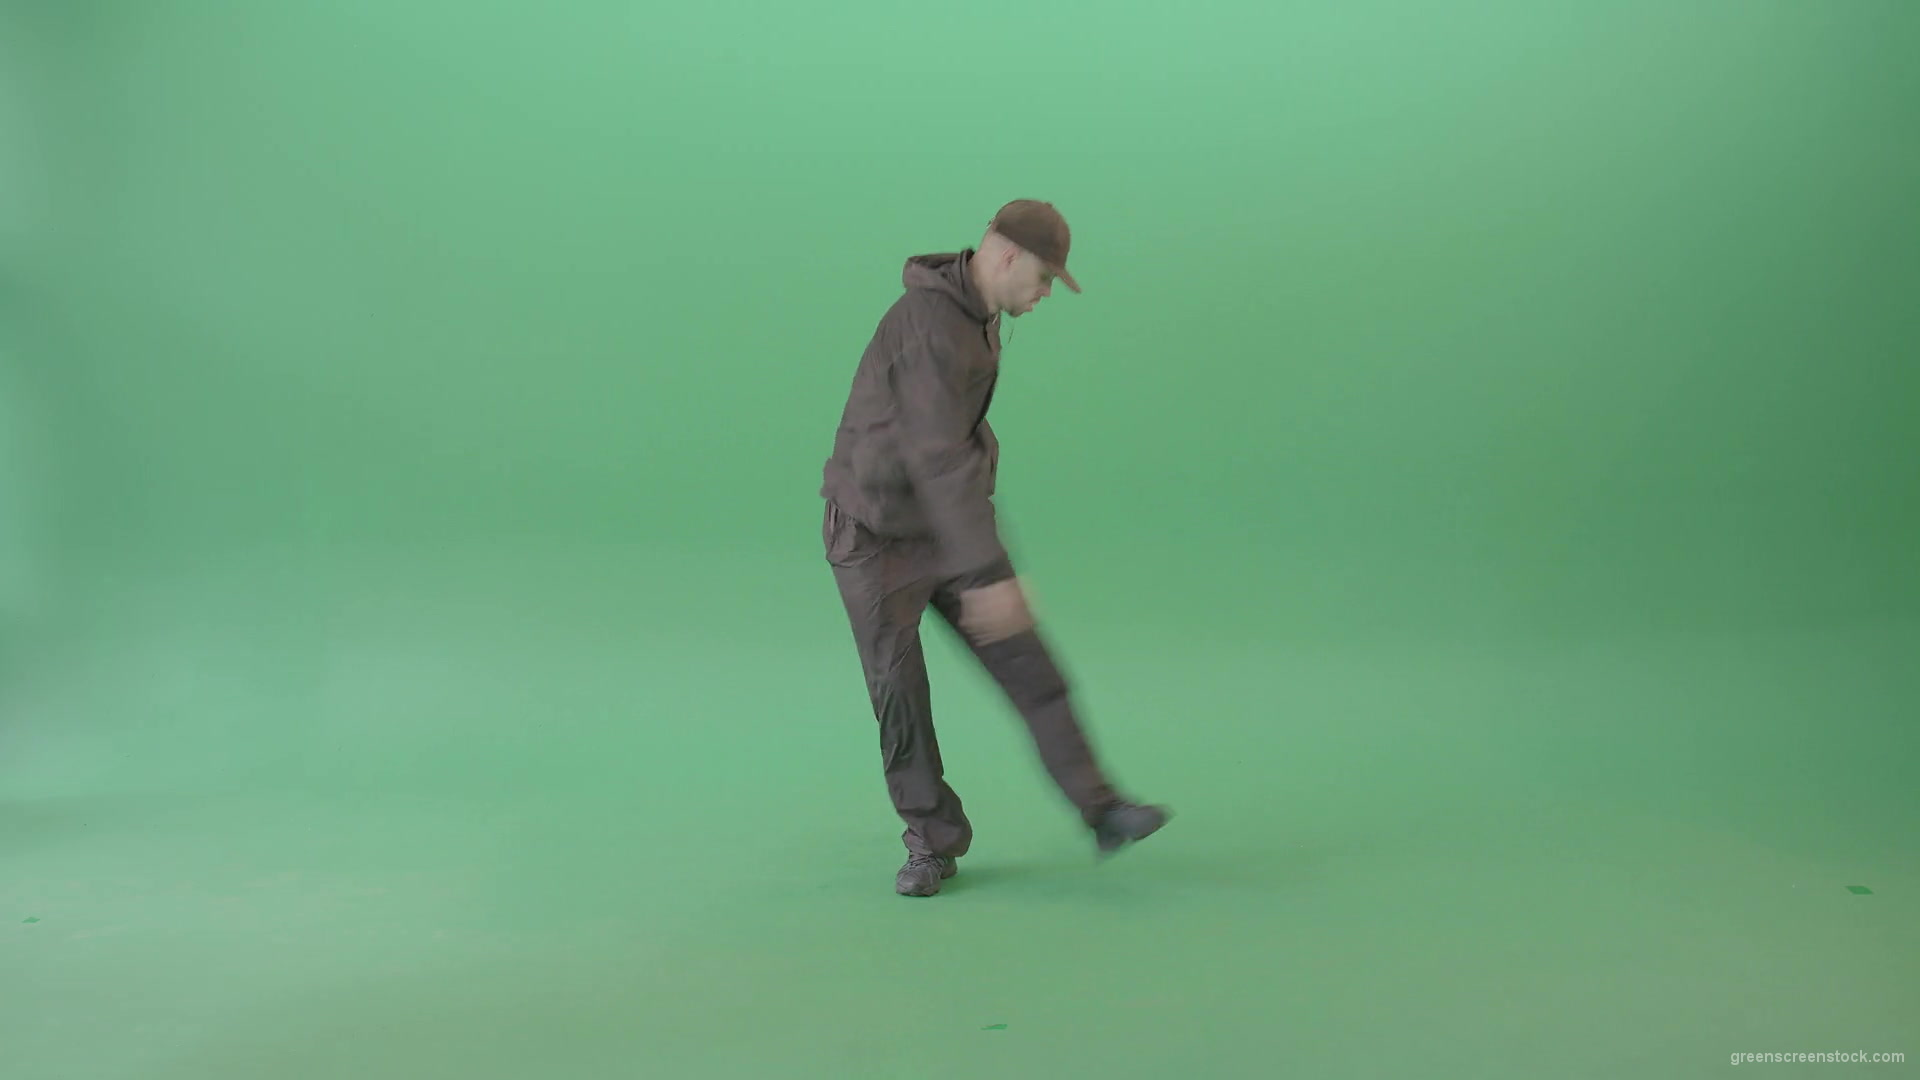 B-Boy-making-gymnastic-break-dance-for-advertising-isolated-on-green-screen-4K-Video-Footage-1920_004 Green Screen Stock